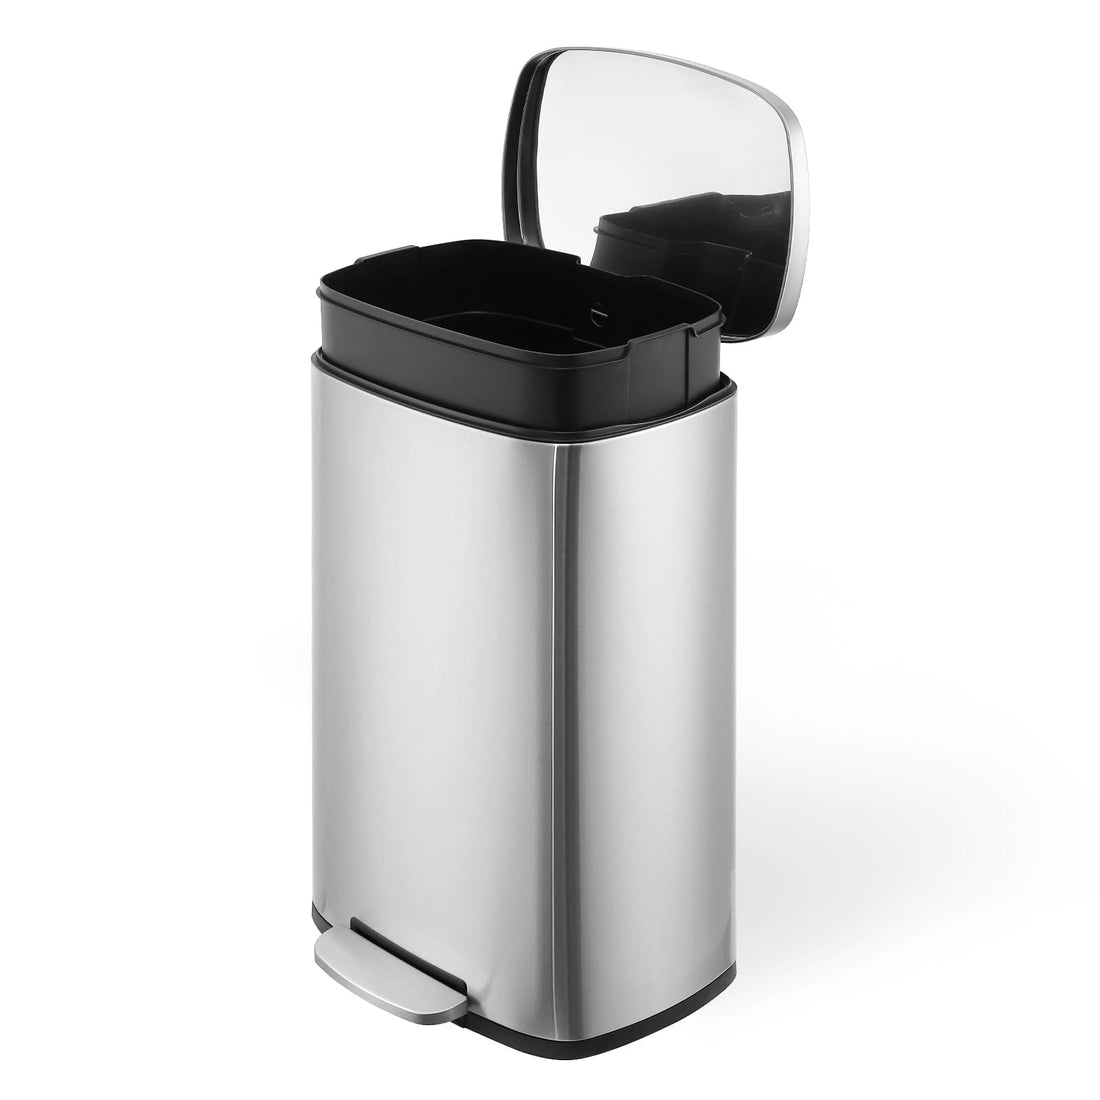 50L Kitchen Trash Can Smudge Resistant Rectangular Garbage Can with Soft-Close Foot Pedal